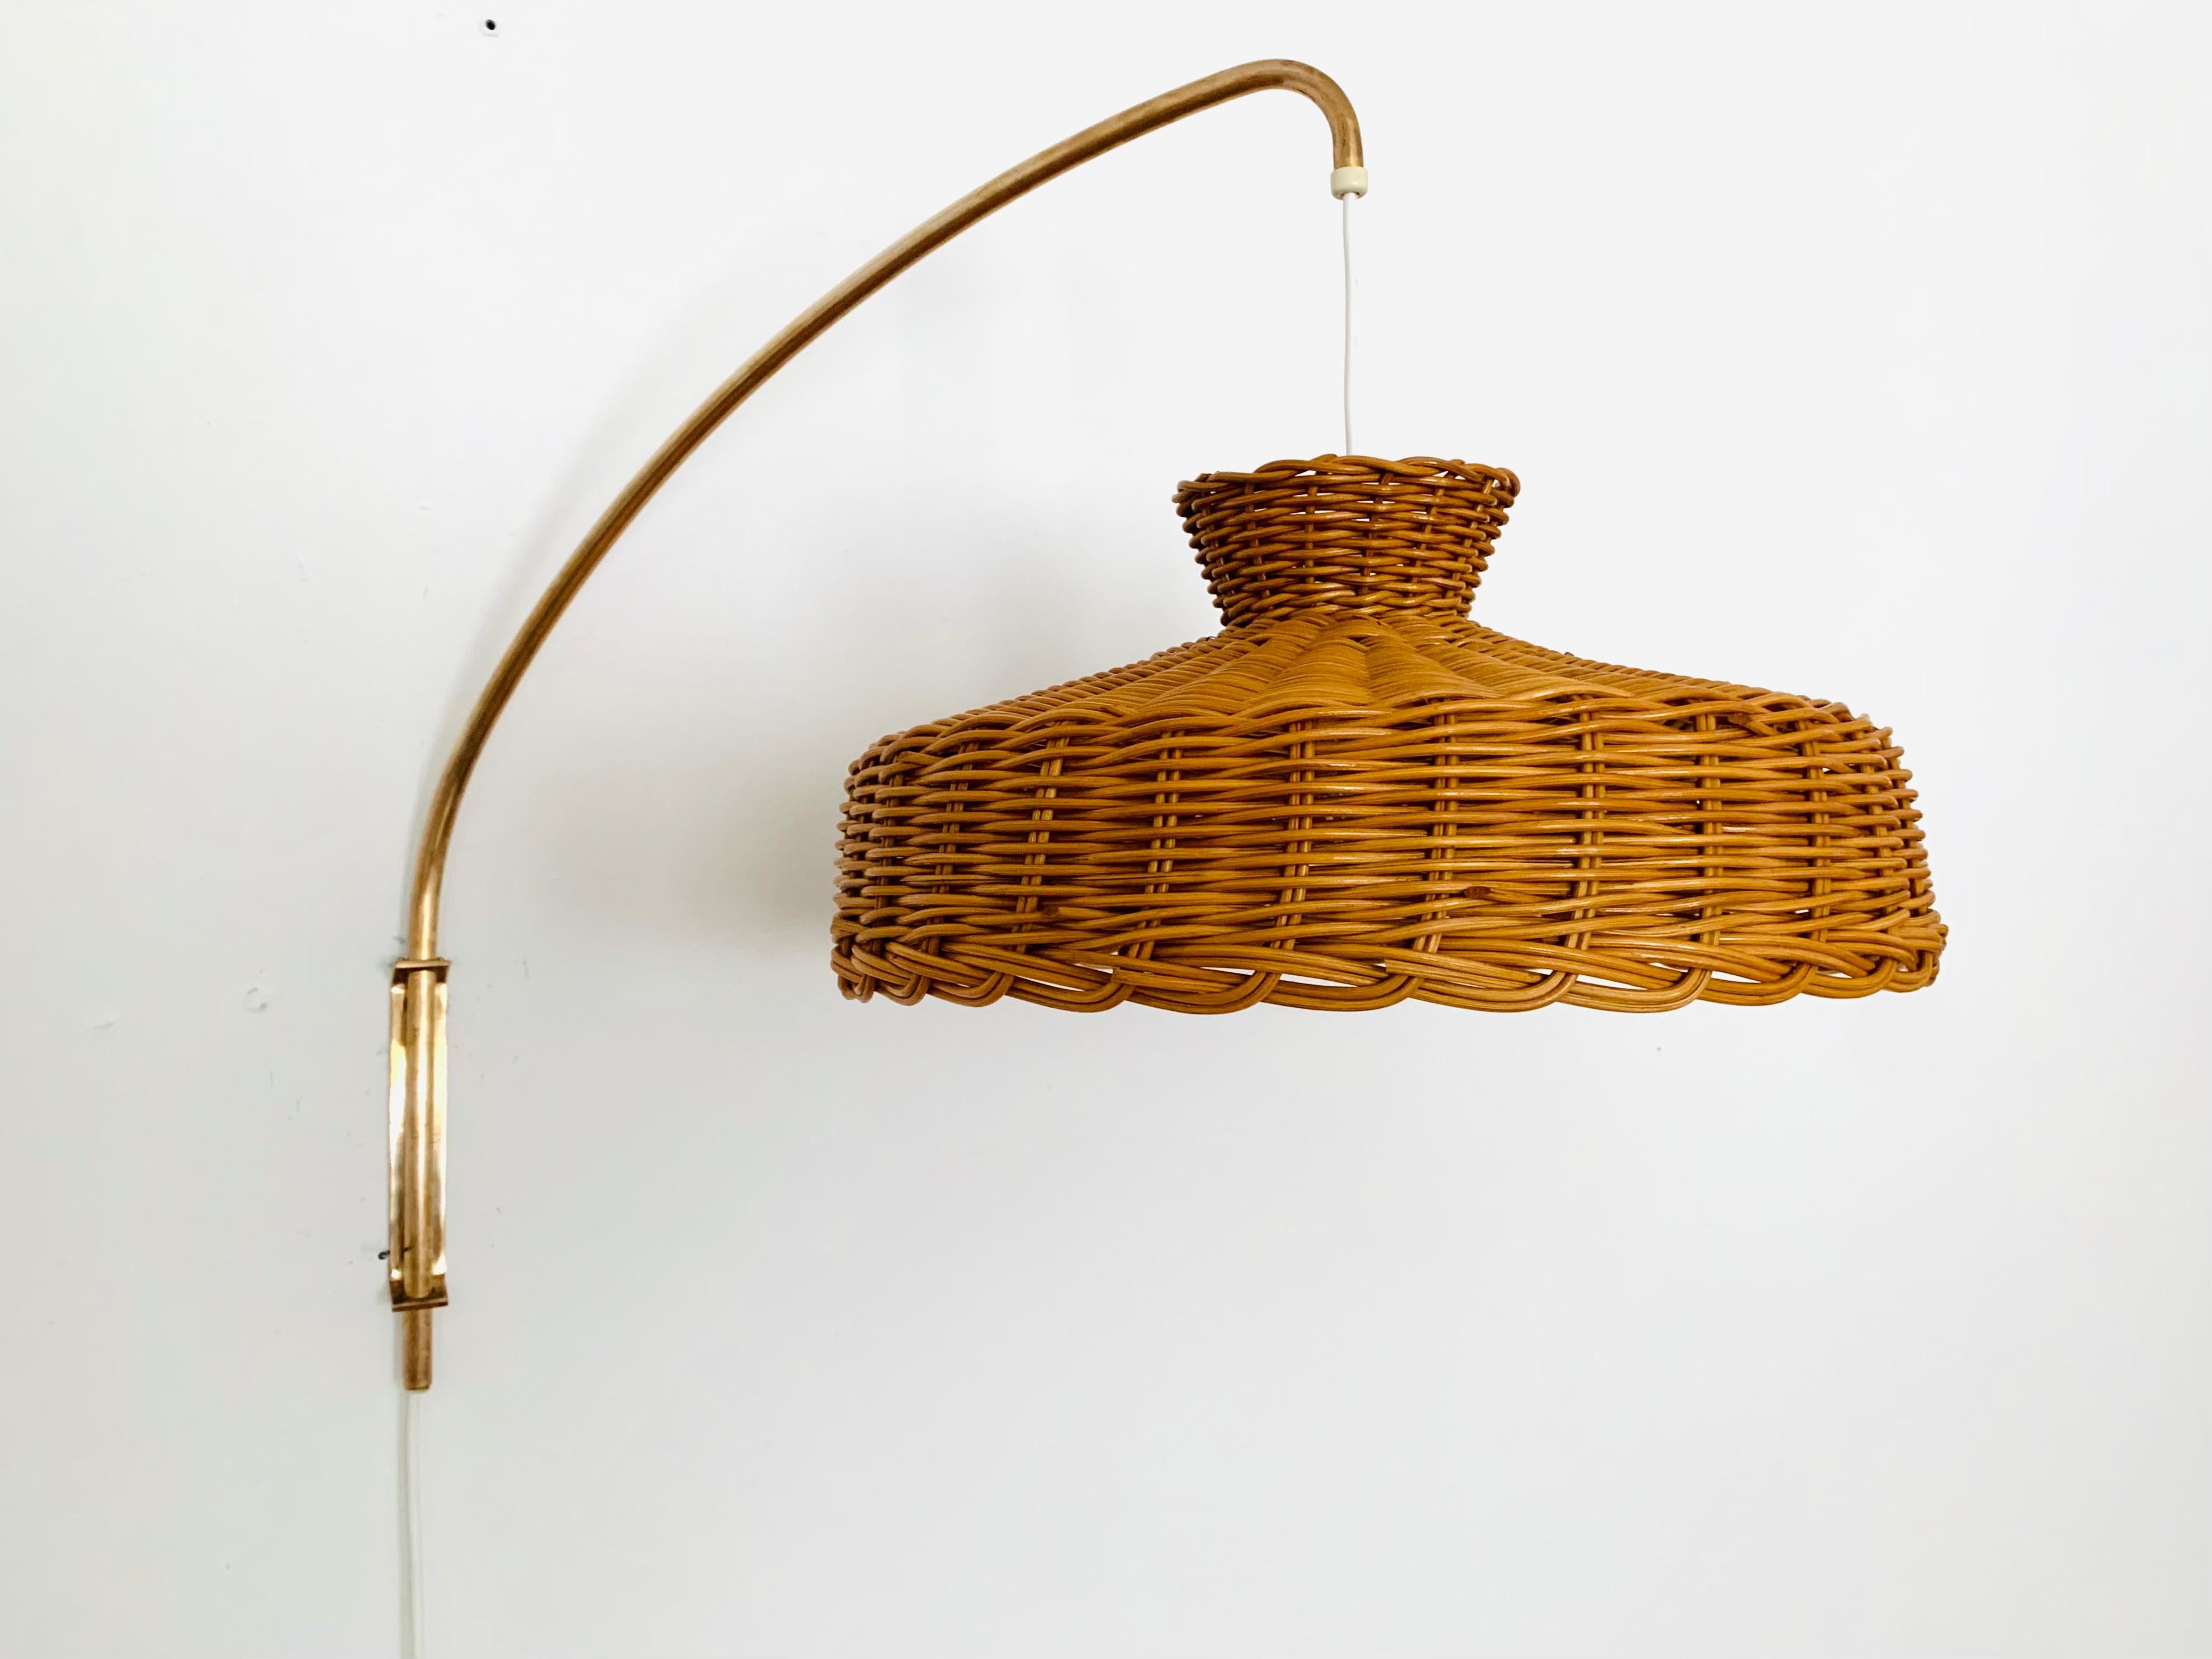 Wonderful arc wall lamp from the 1960s.
Great and exceptionally minimalistic design with a fantastically elegant look.
Very nice swiveling brass arm.
The lampshade creates a spectacular play of light and creates a very cozy